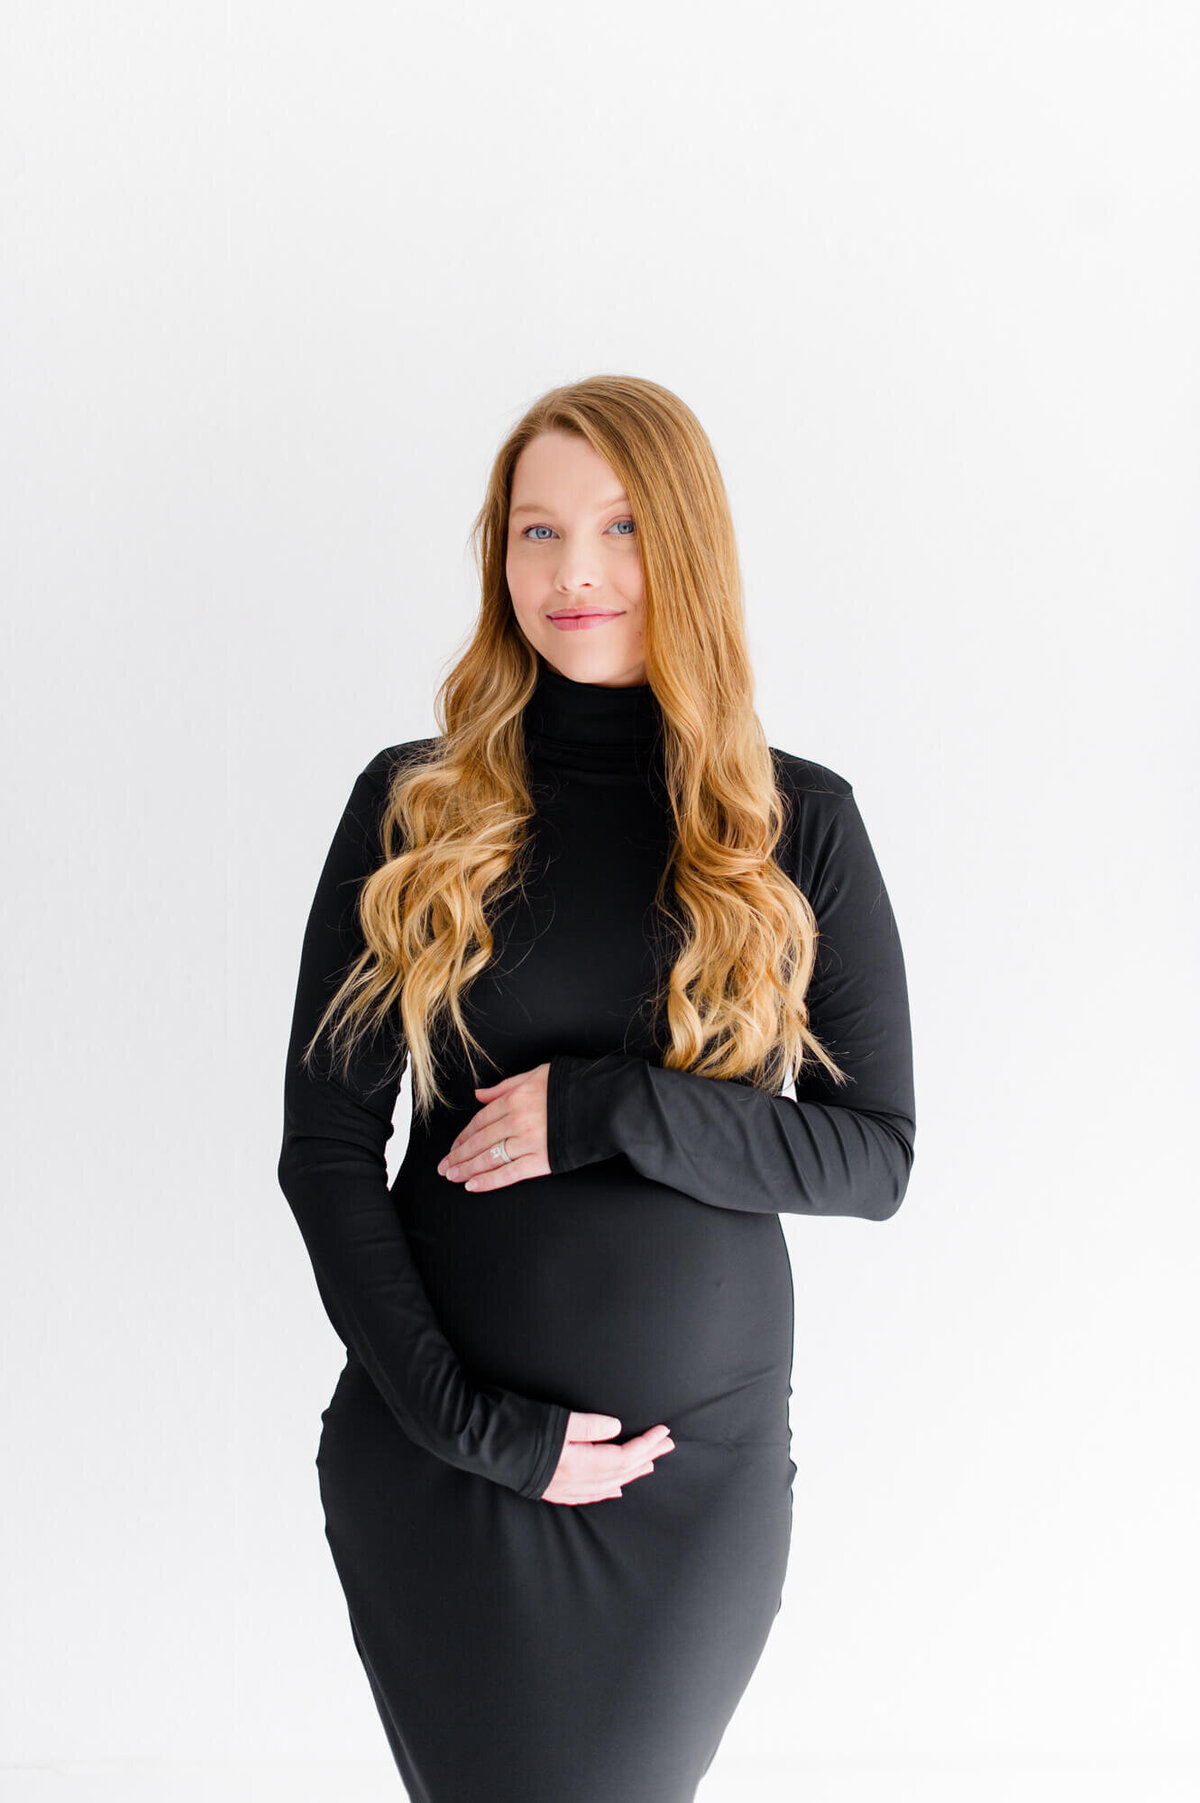 Pregnant mom standing on a white wall holding her belly in a beautiful black dress